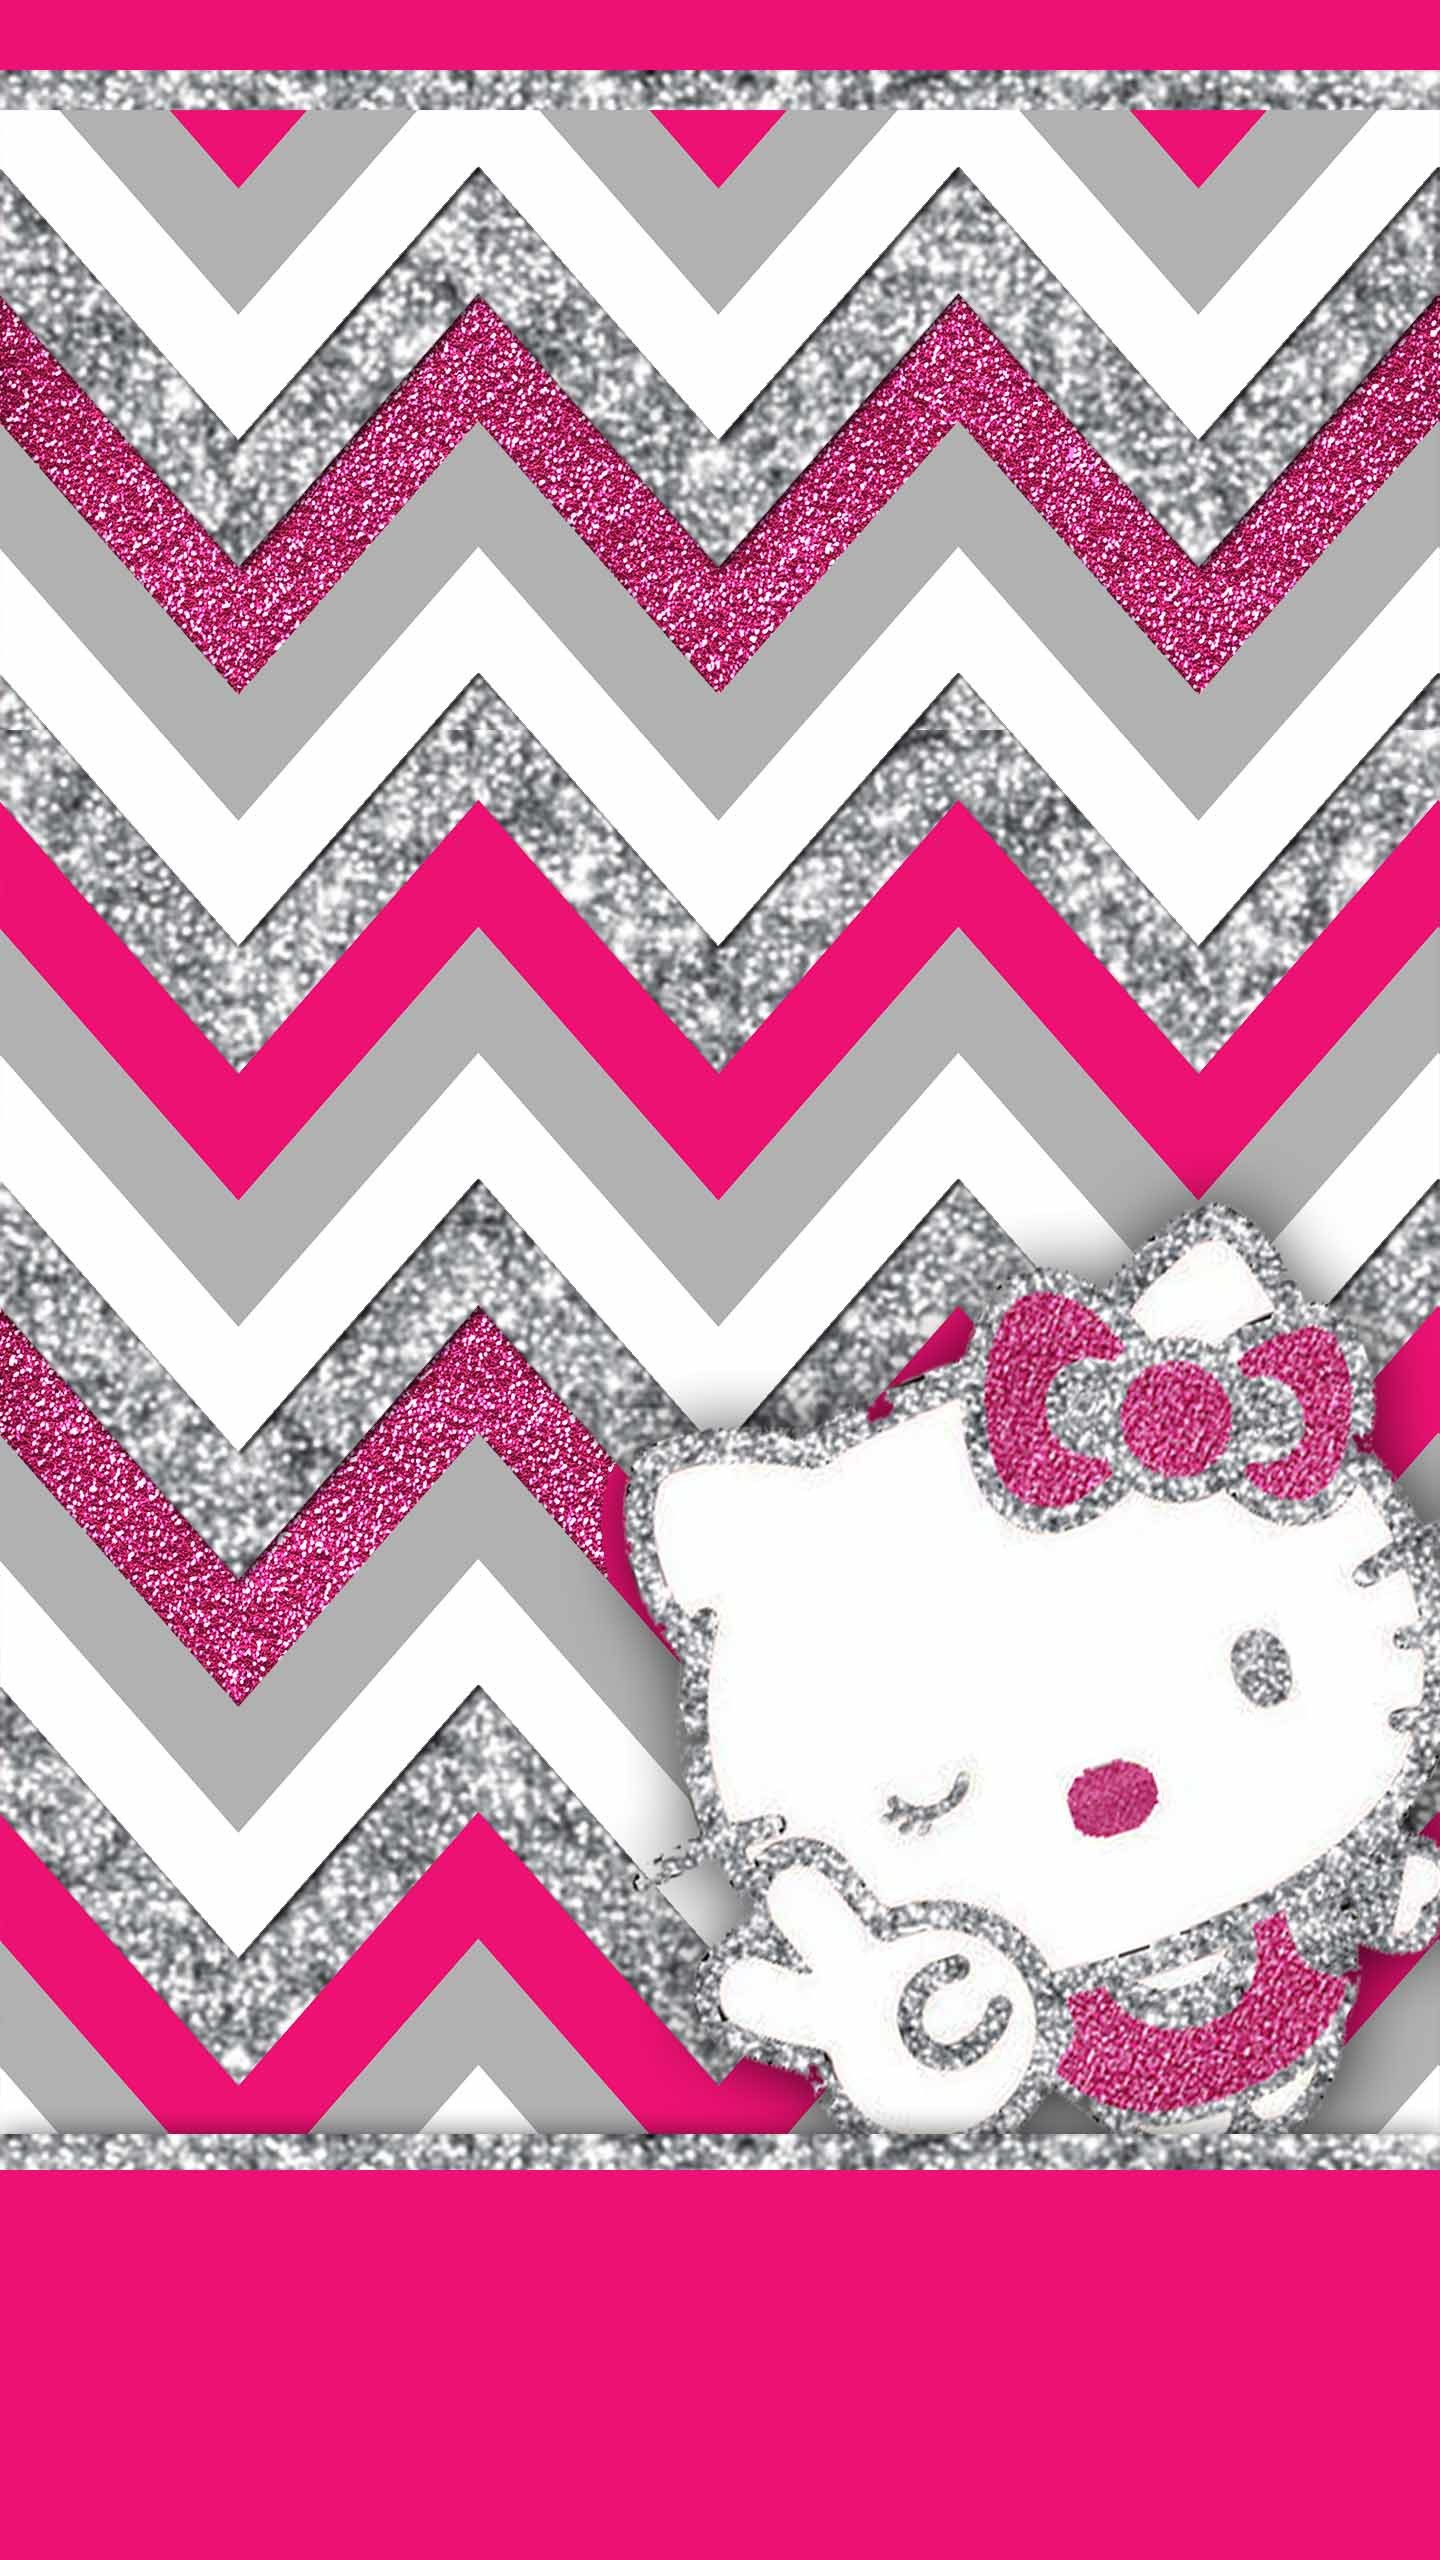 1440x2560 Free Pink and Silver Glitter wallpaper pack including minnie mouse and  hello kitty. Available for